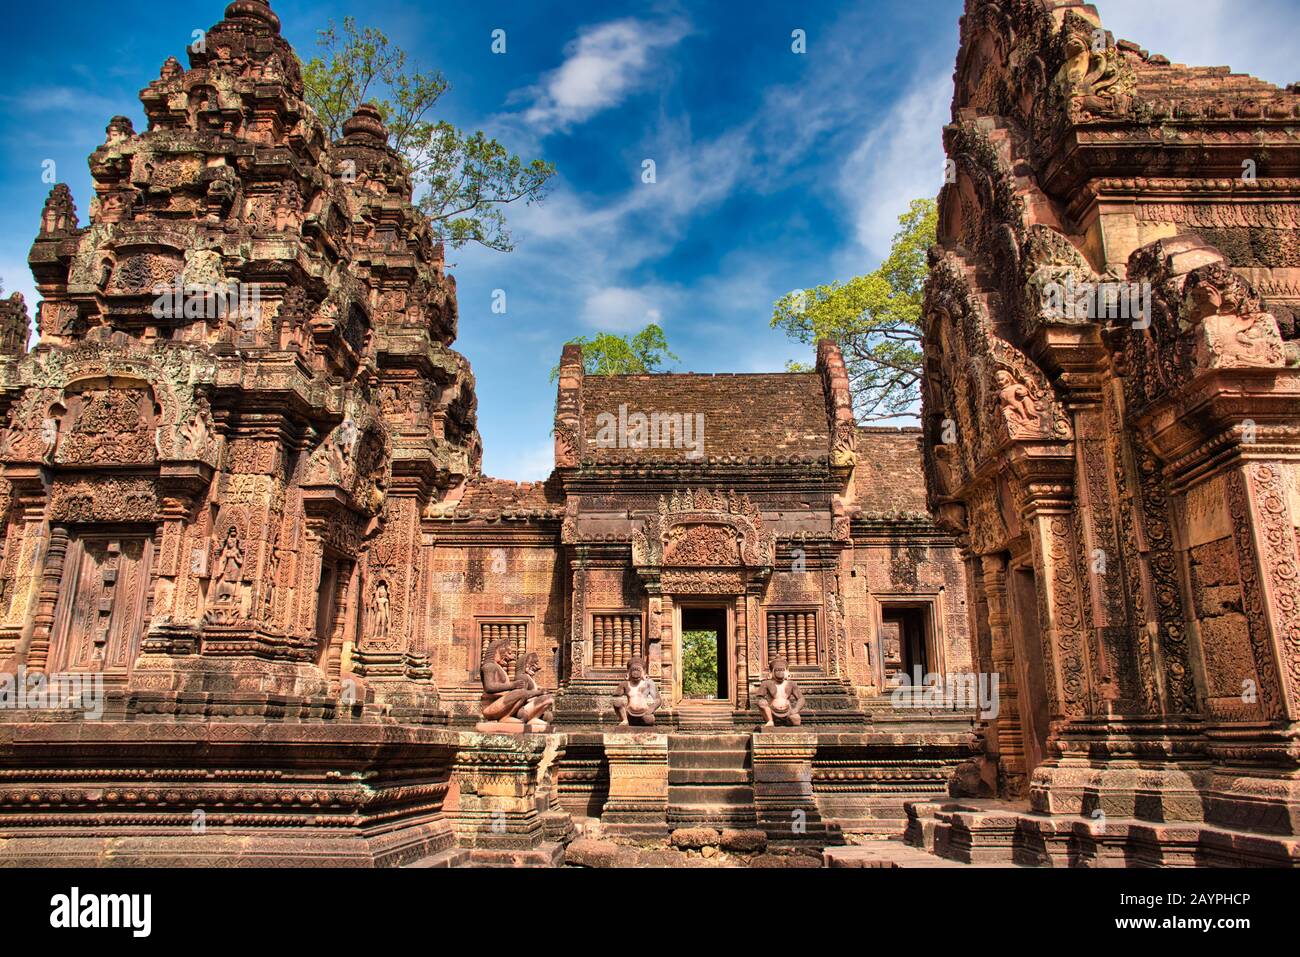 Banteay Srei or Banteay Srey Temple site among the ancient ruins of Angkor Wat Hindu temple complex in Siem Reap, Cambodia. The Temple is dedicated to Stock Photo